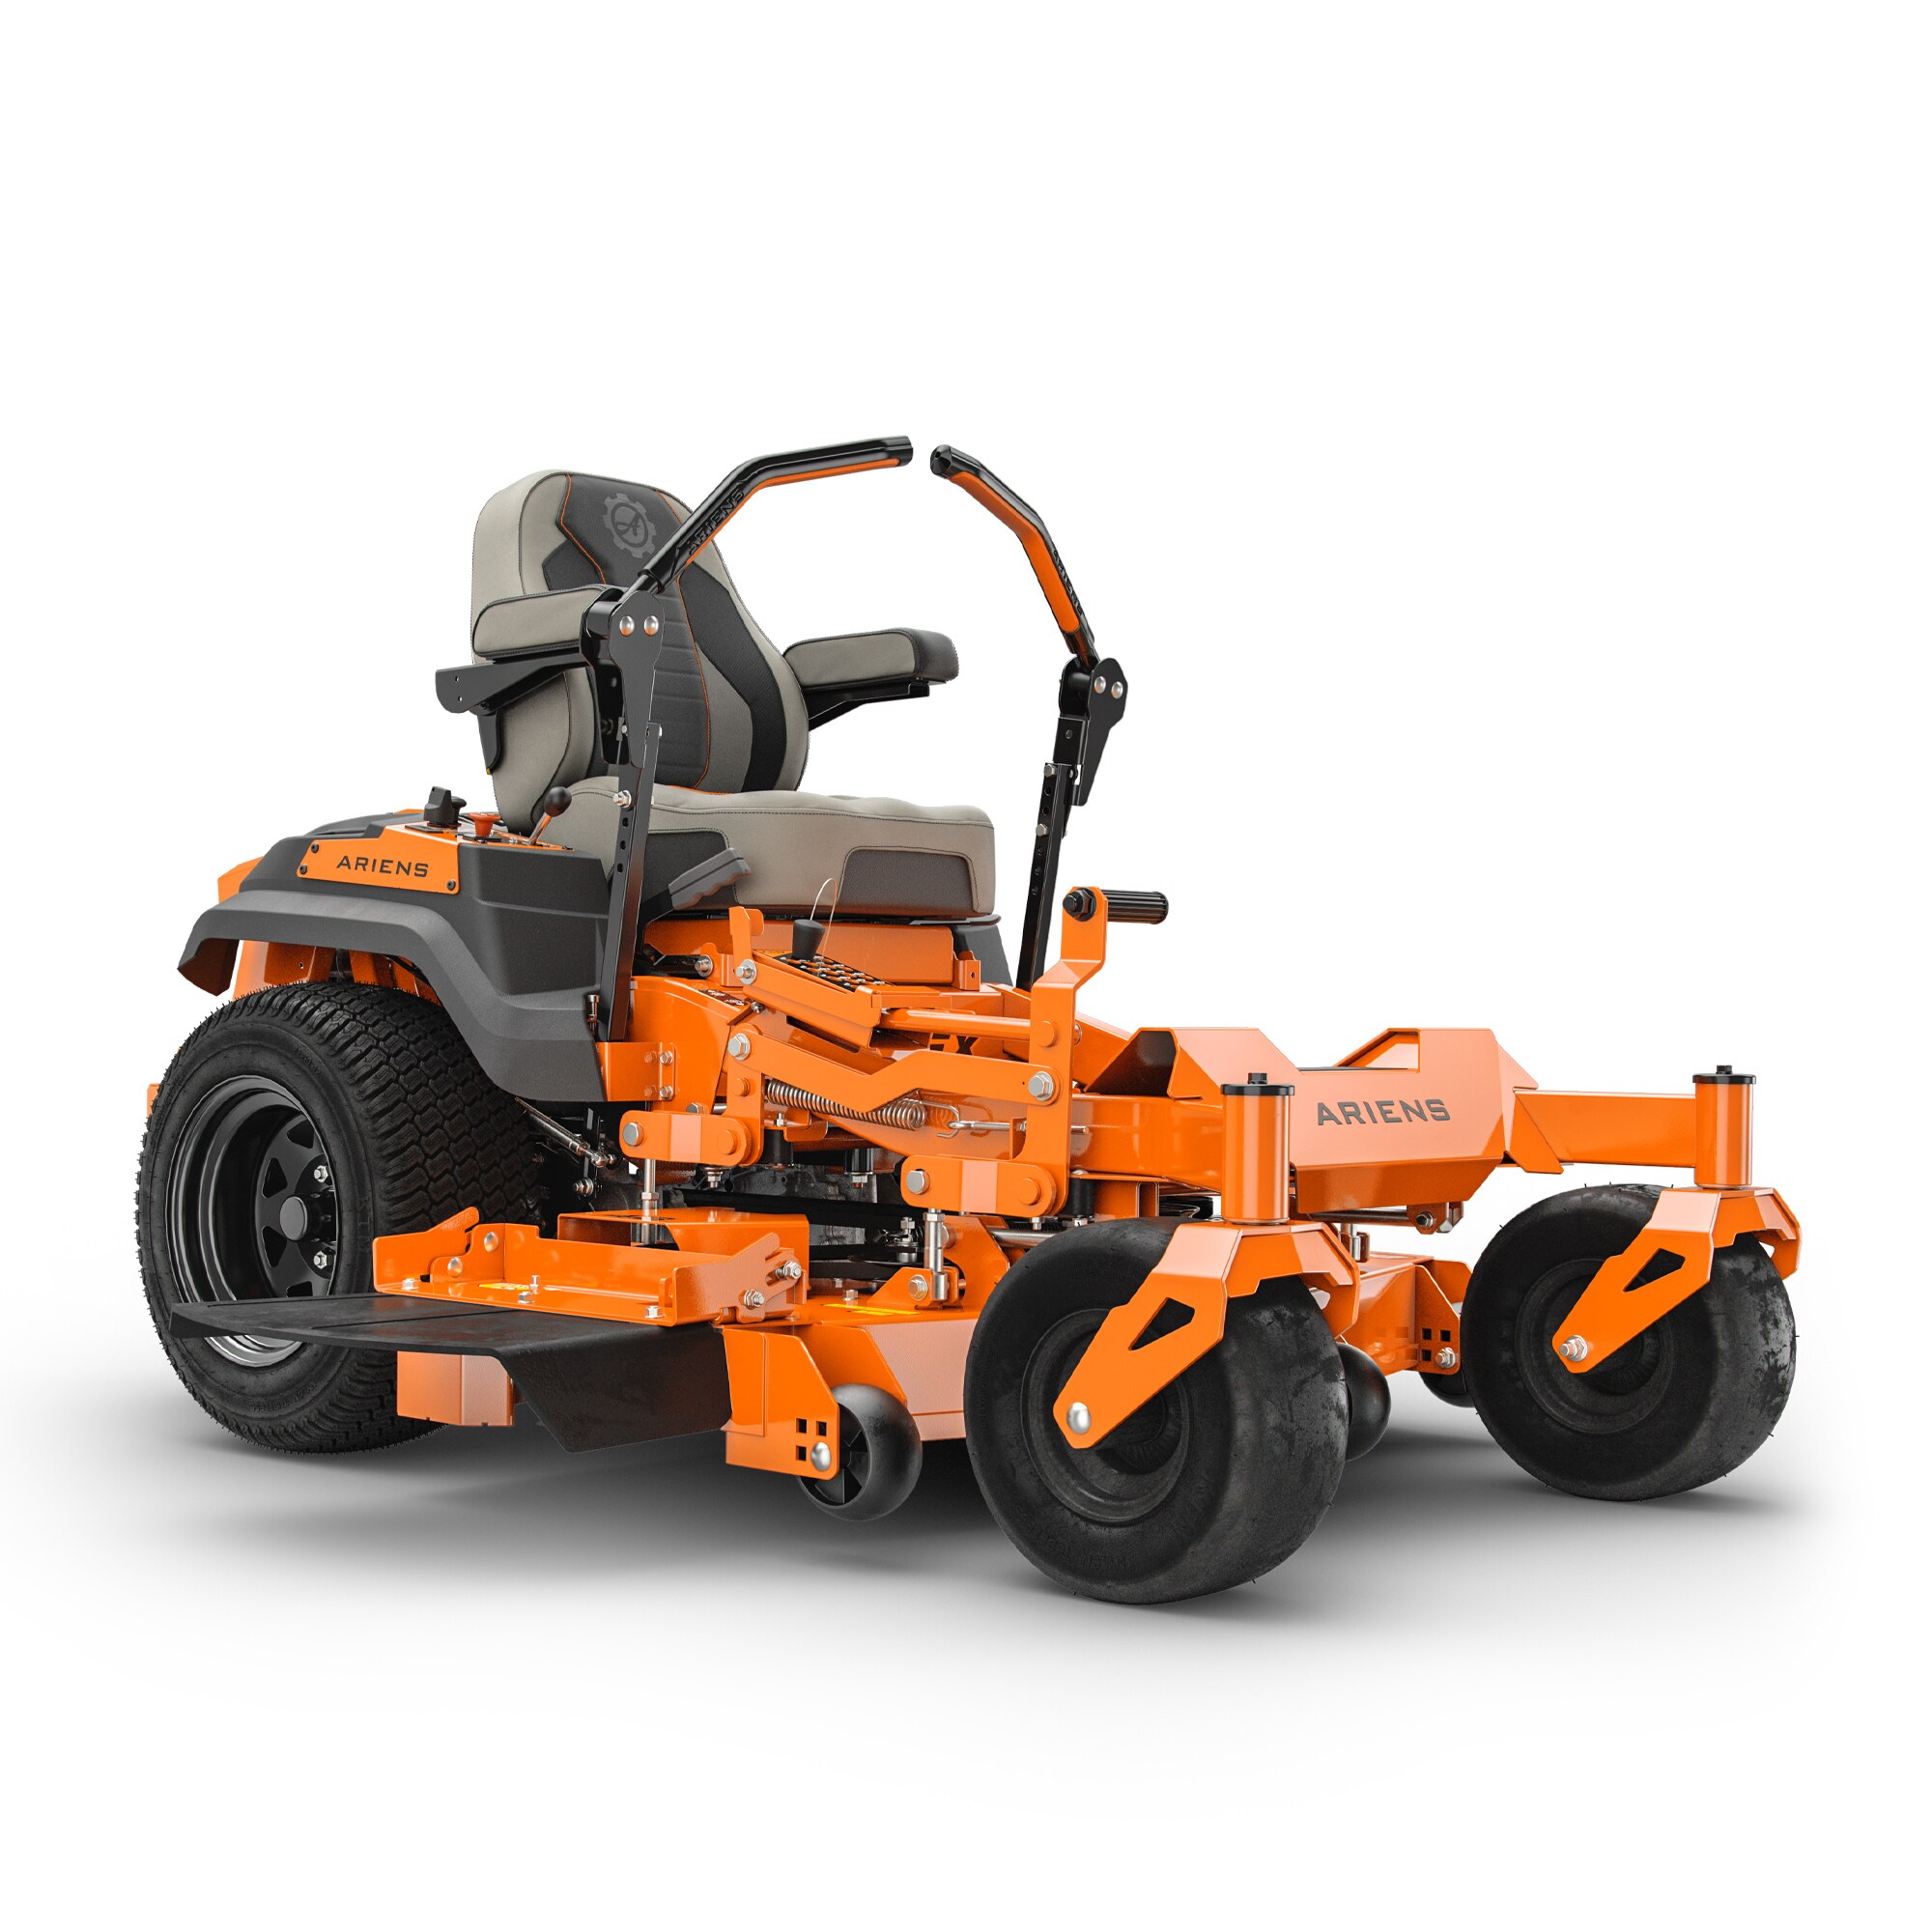 Image of Zero-Turn Cultivator Lowes